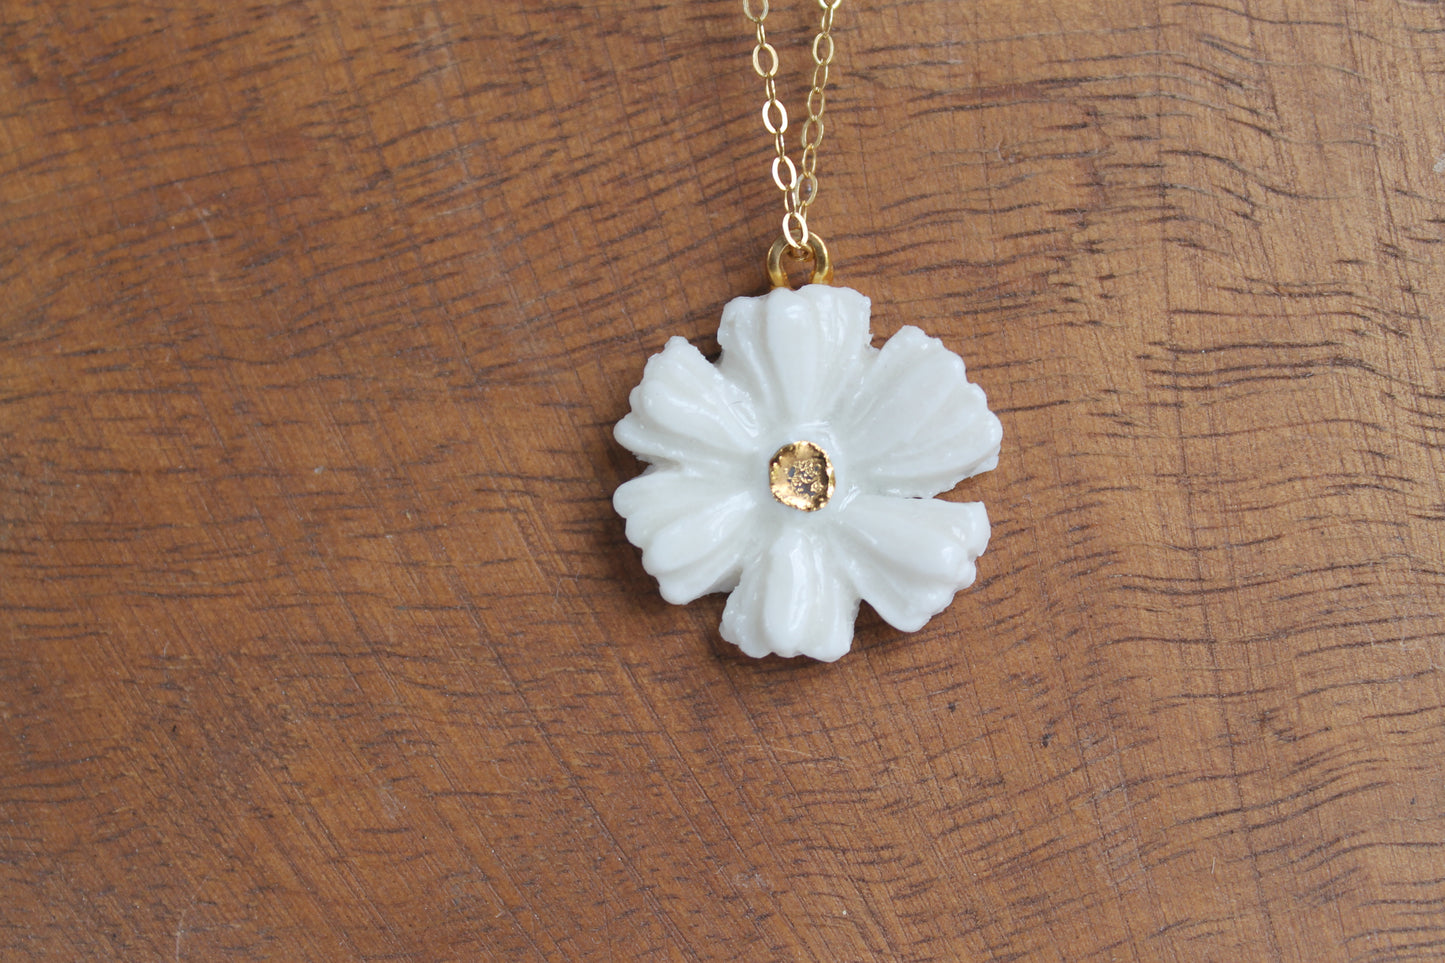 Flower Necklace, Porcelain with gold filled chain